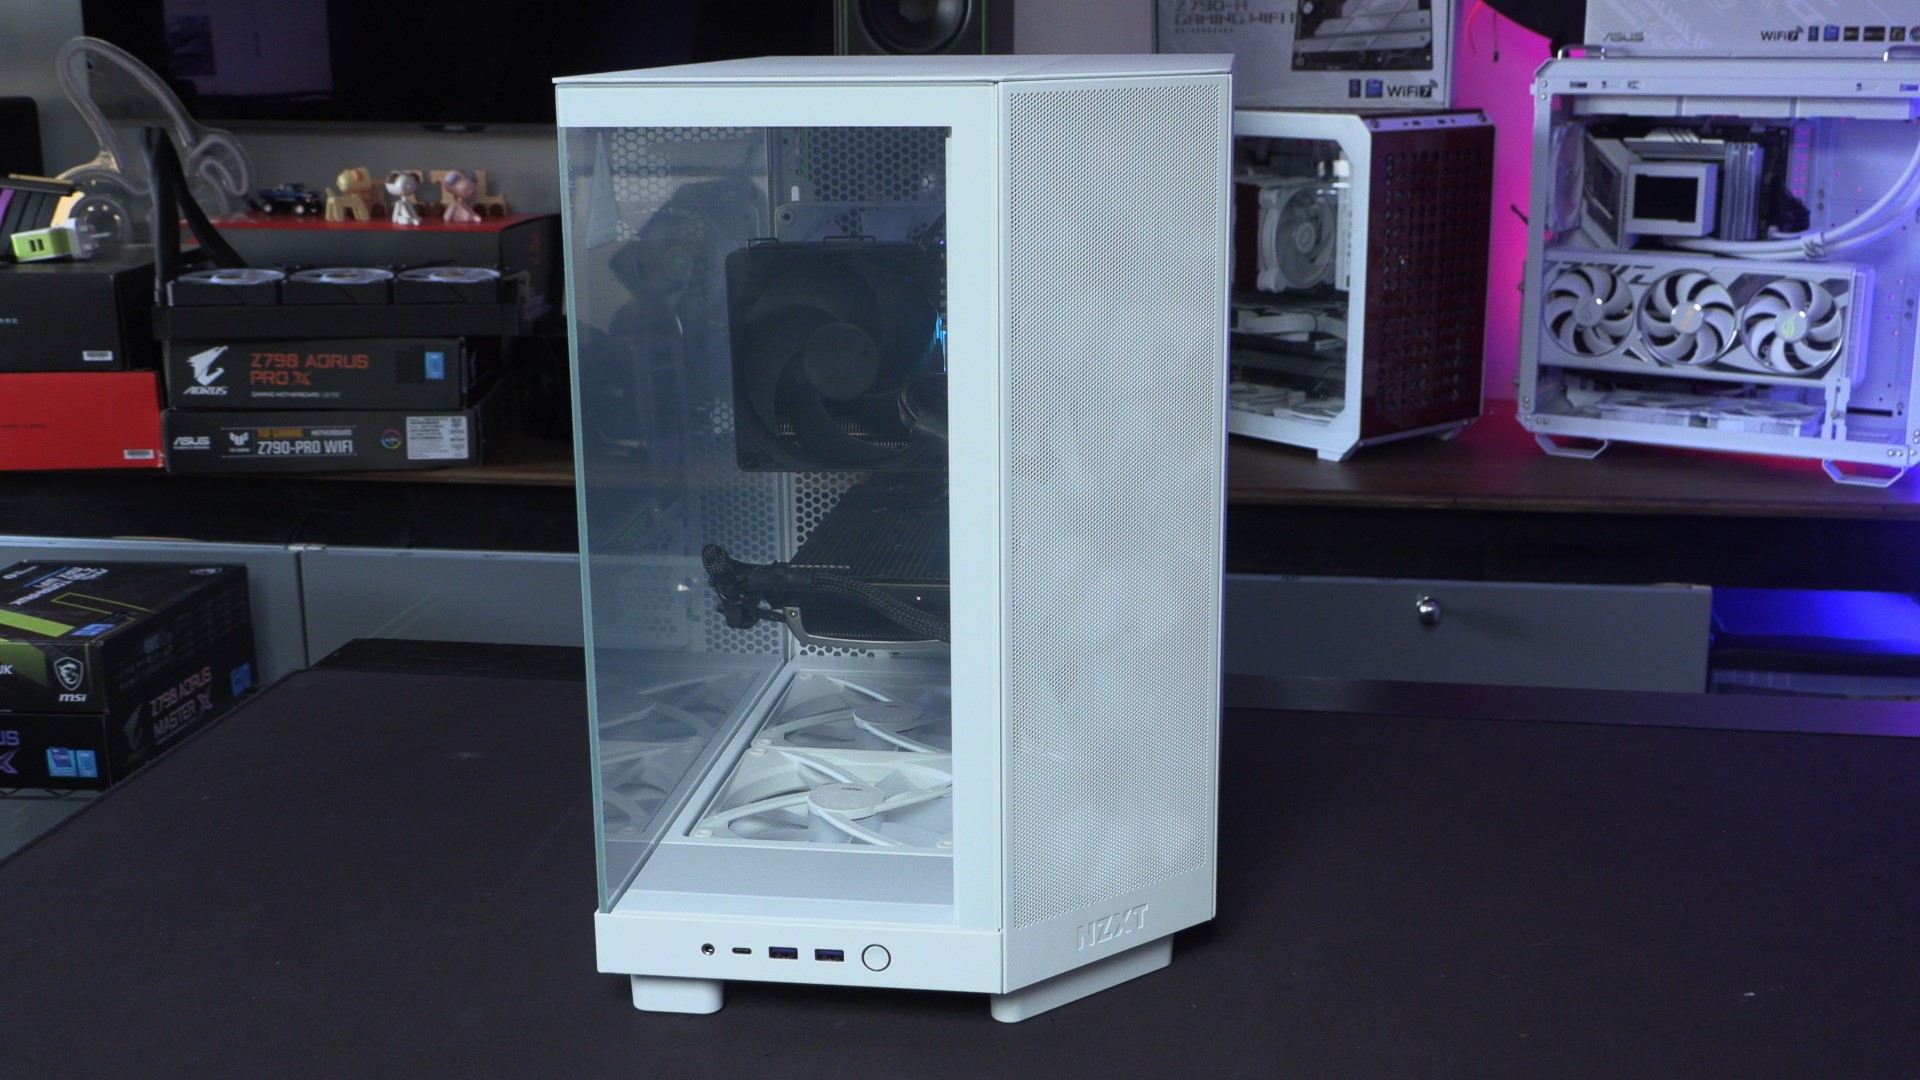 NZXT H6 Flow RGB review: A showcase chassis with great cooling